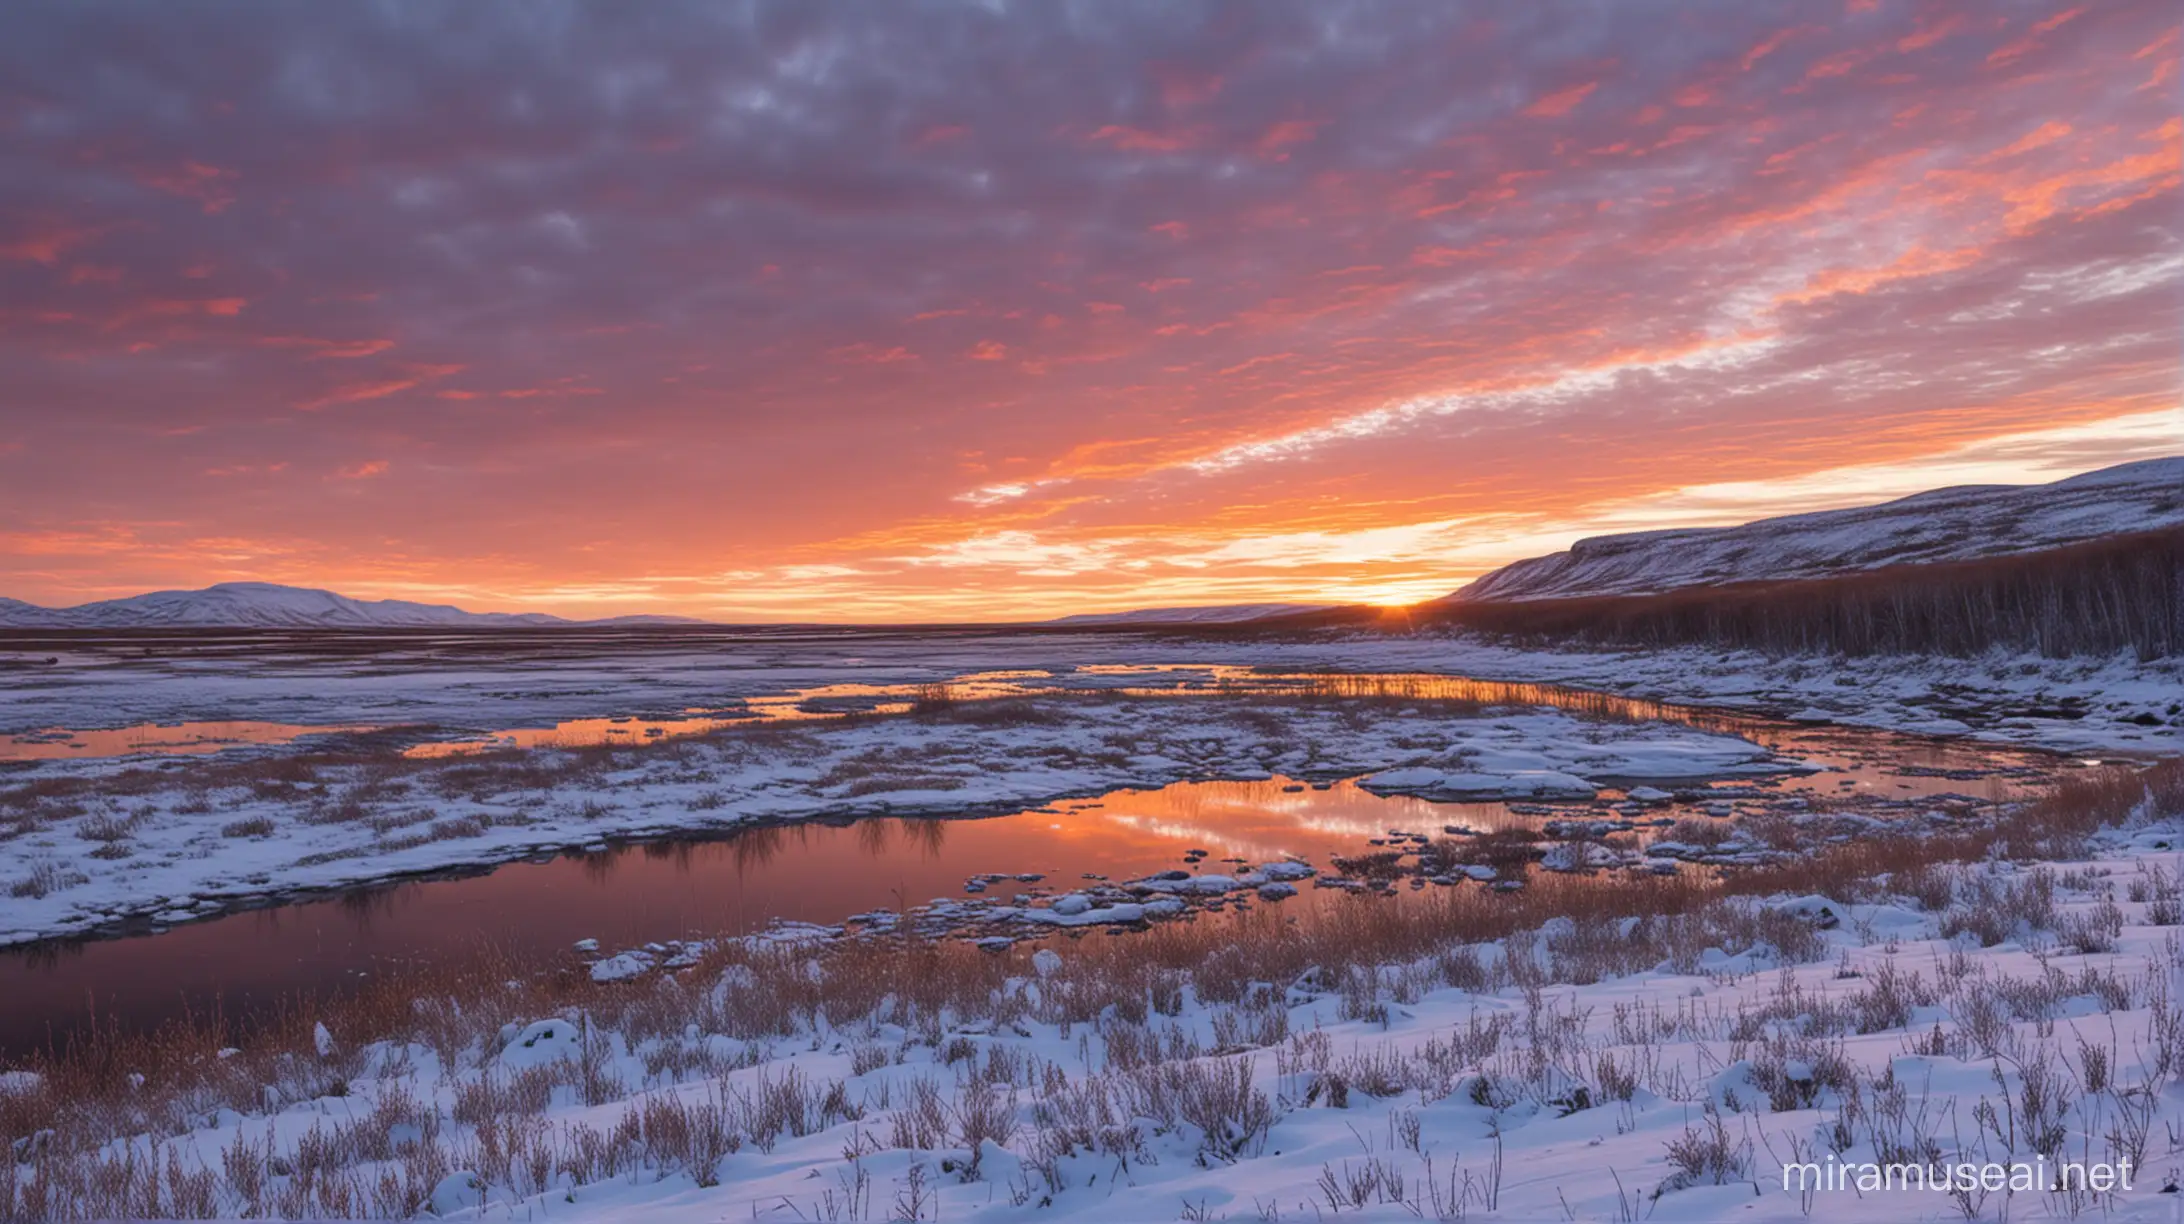 Tundra-style sunsets are very beautiful in the tundra biome and the tundra-like sky is very beautiful There was a 16 year old man standing on the river bank,